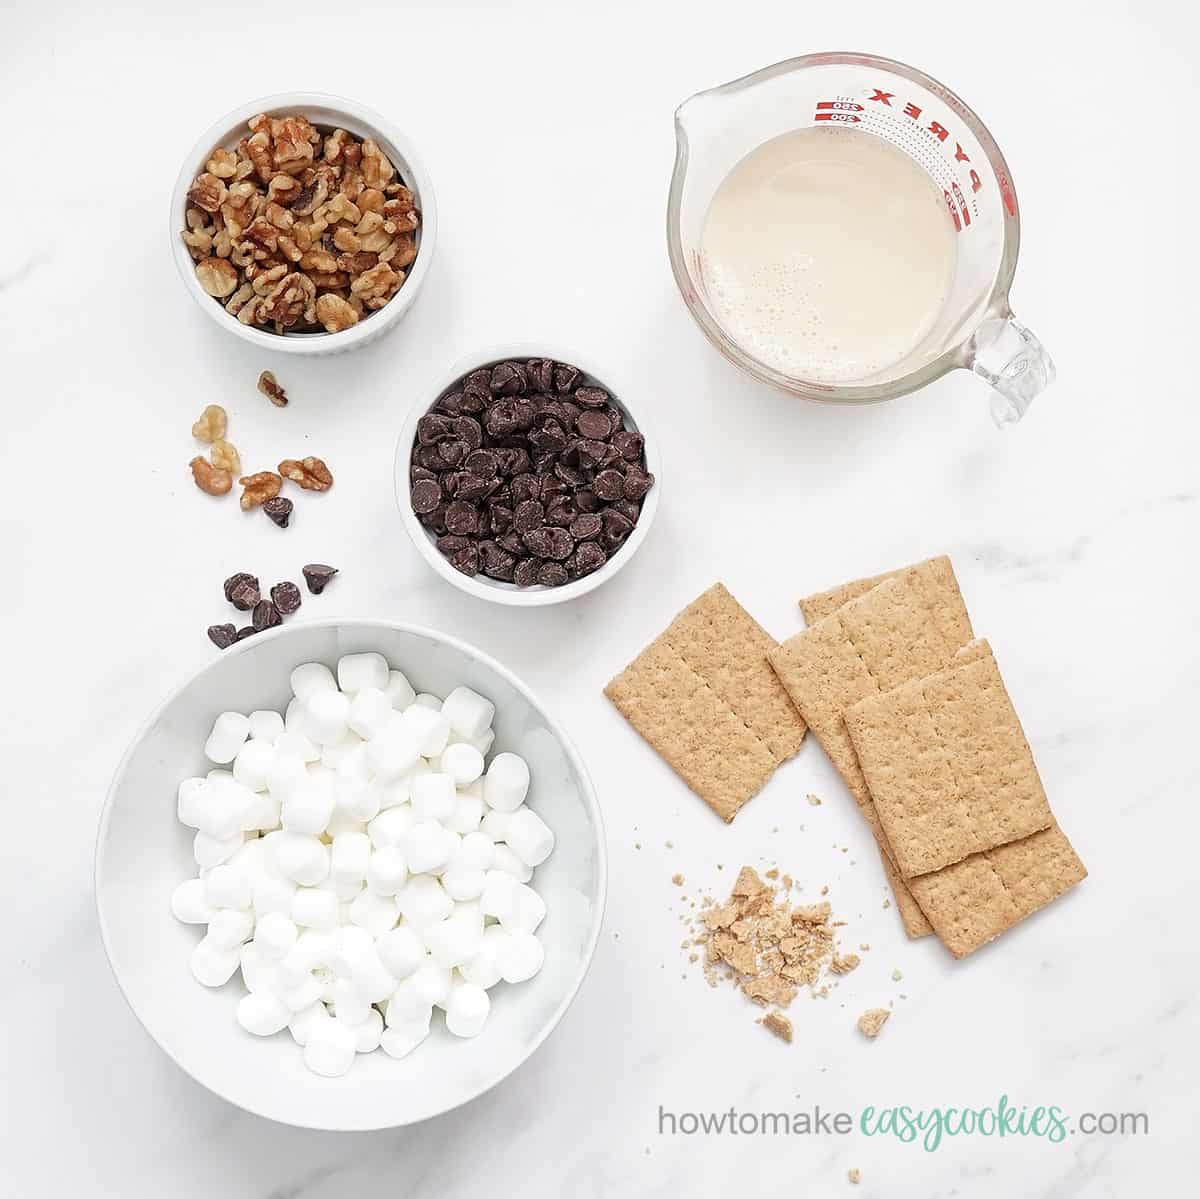 s'mores bar Rocky Road ingredients, graham crackers, milk, chocolate chips, mini marshmallows, chopped walnuts 